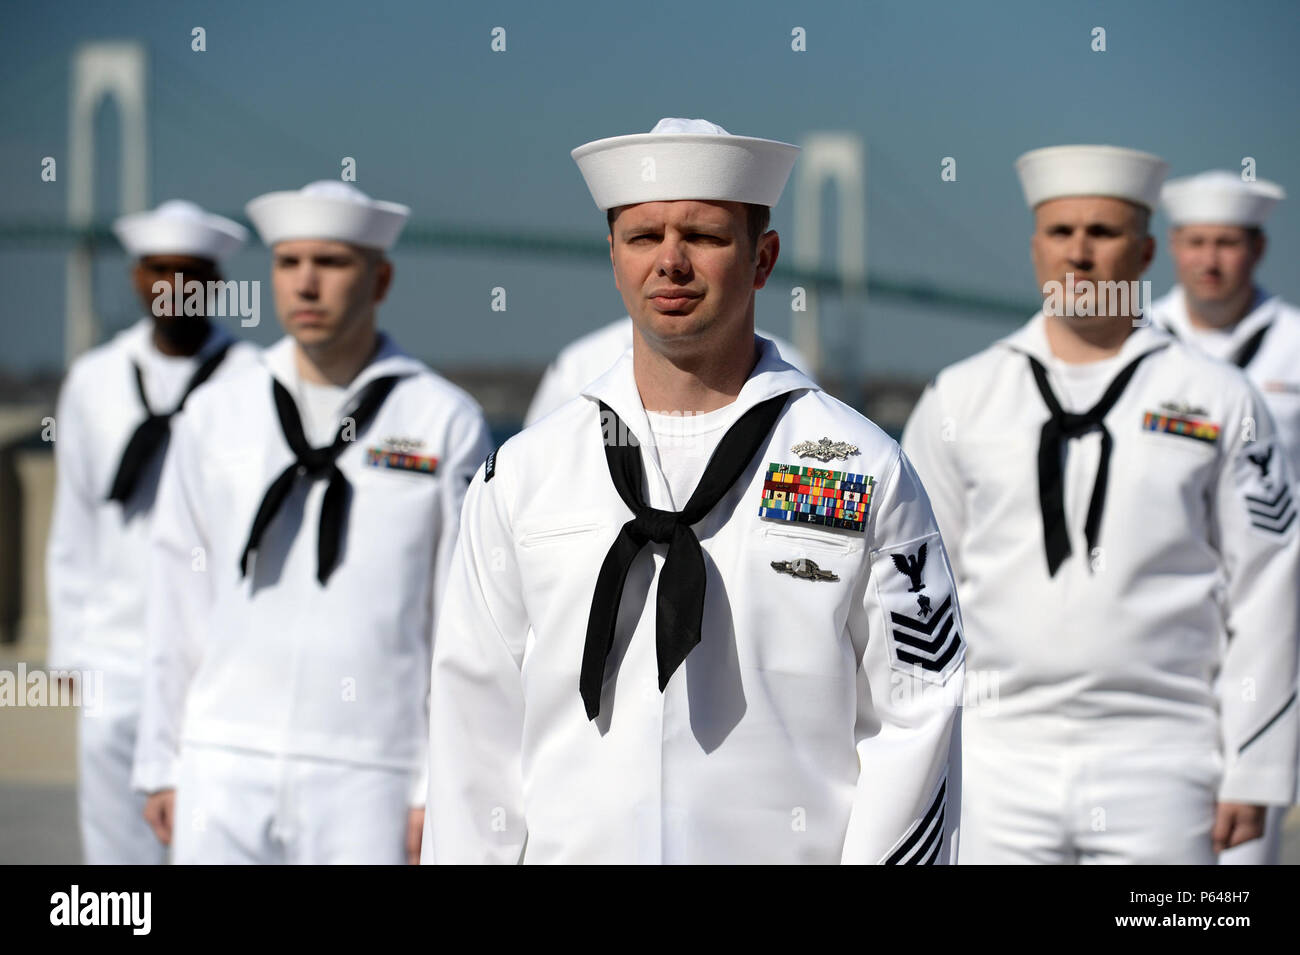 160419-N-PX557-042 NEWPORT, R.I. (April 19, 2016) Builder 1st Class Matthew  Johnson, assigned to U.S. Naval War College (NWC), stands in formation  during a service dress white uniform inspection of enlisted personnel at